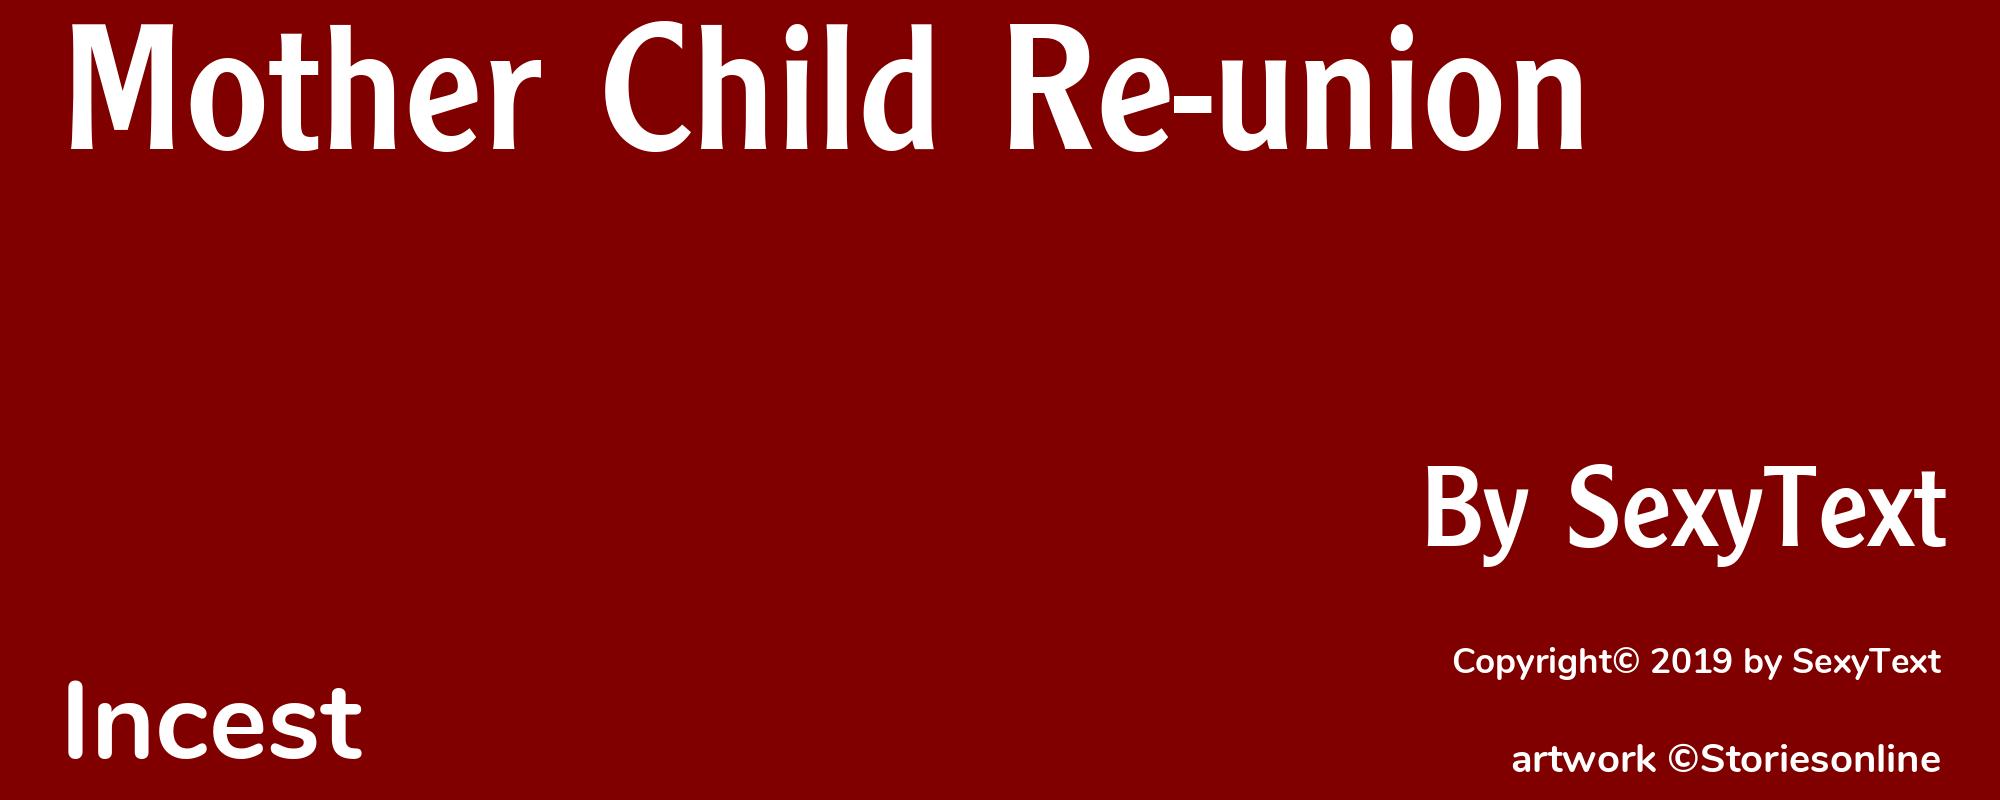 Mother Child Re-union - Cover